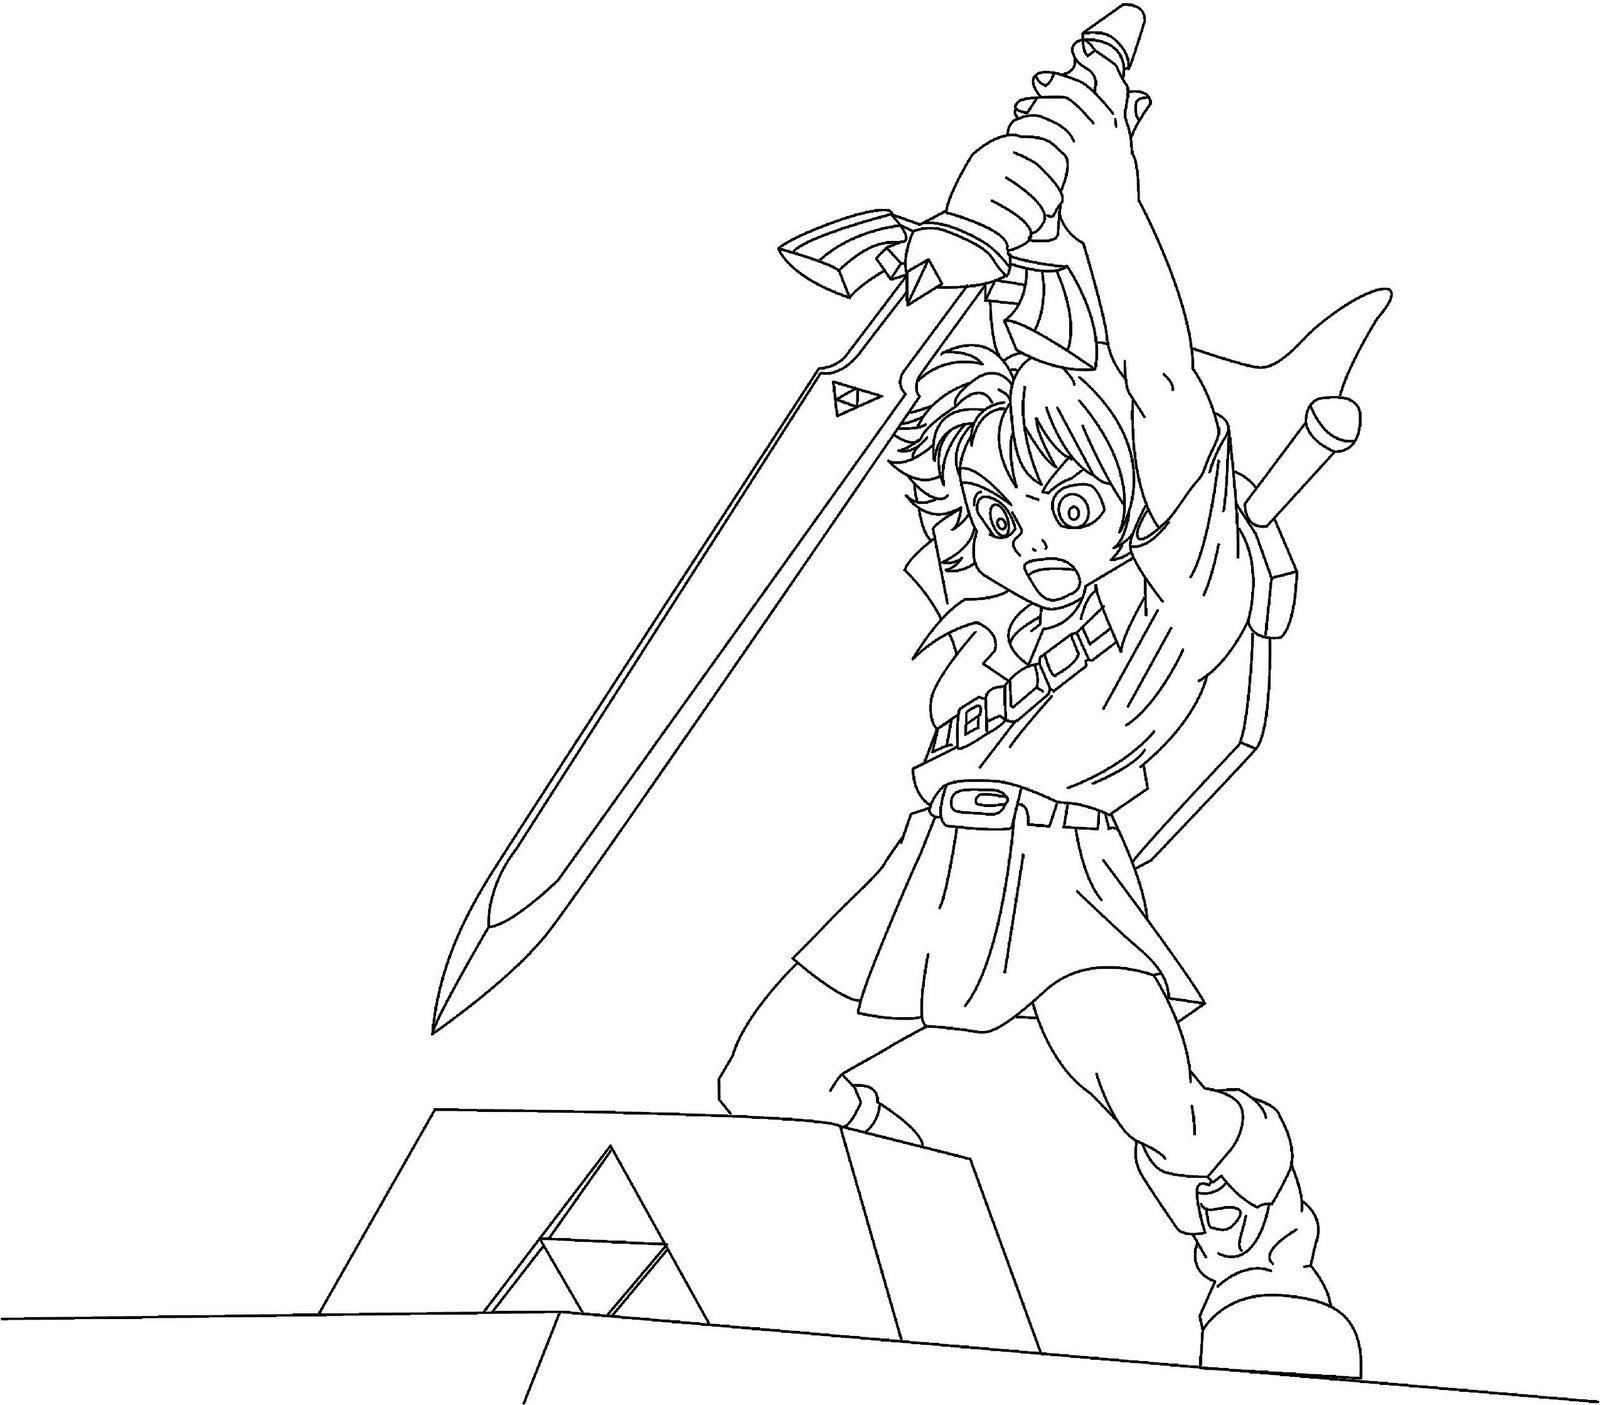 Link Zelda Coloring Pages - Coloring Home